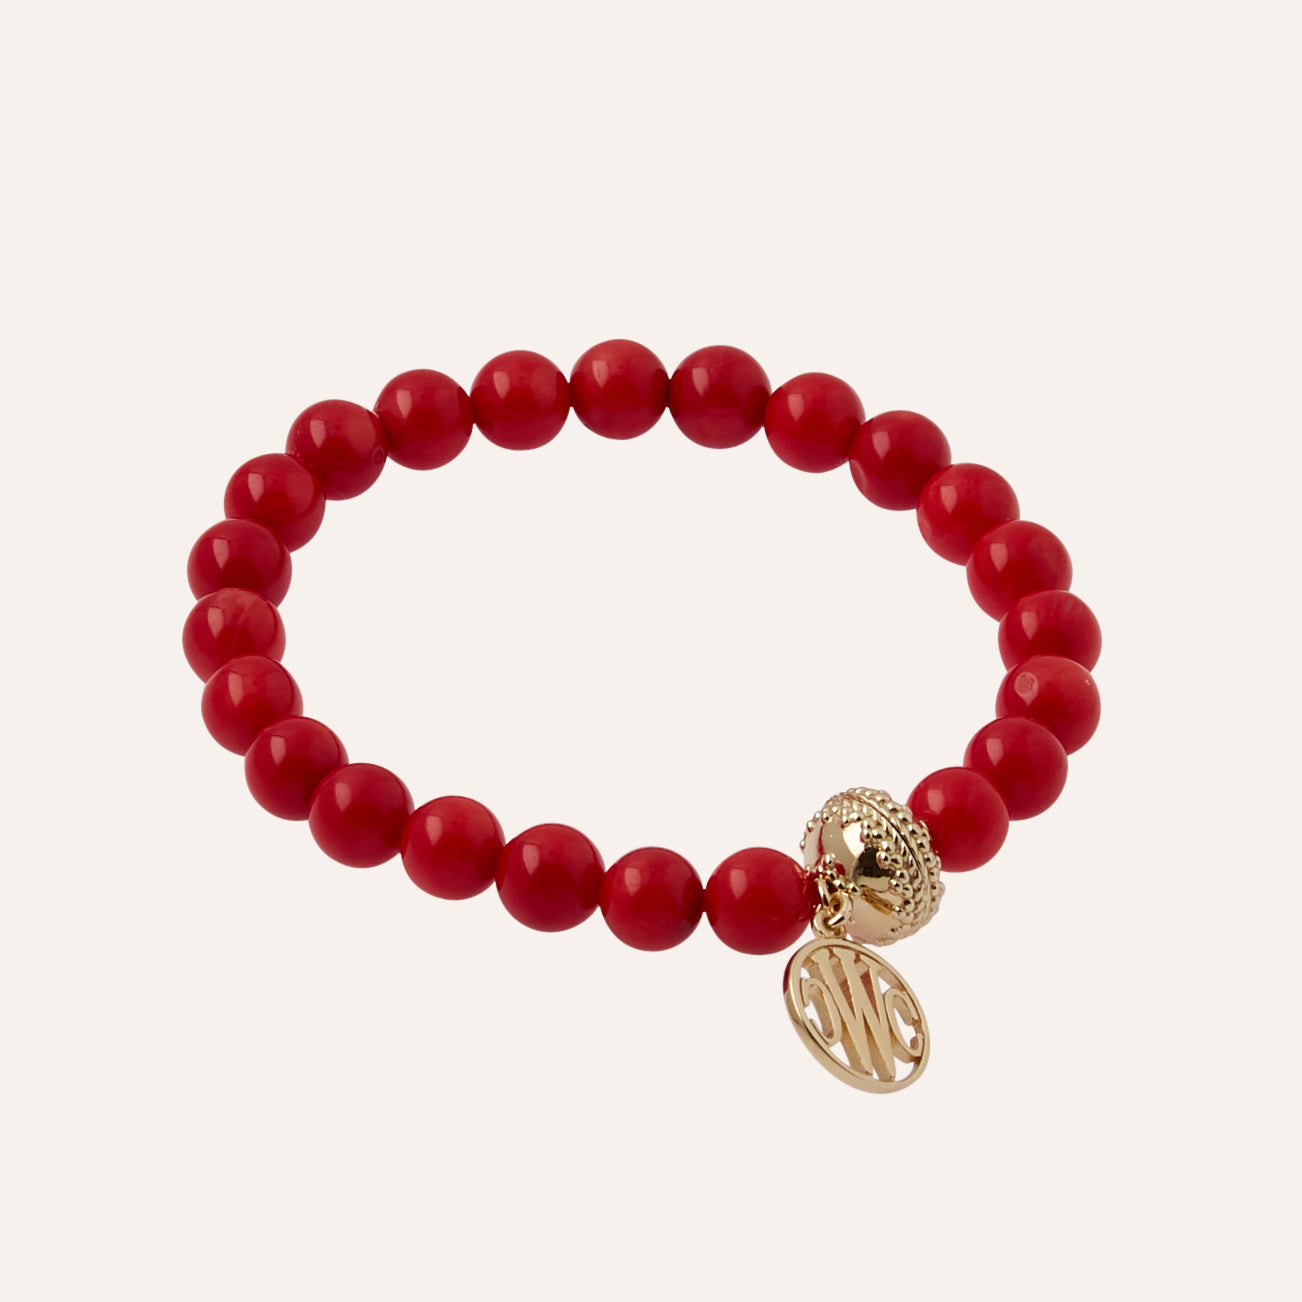 Victoire Dyed Red Coral 8mm Stretch Bracelet